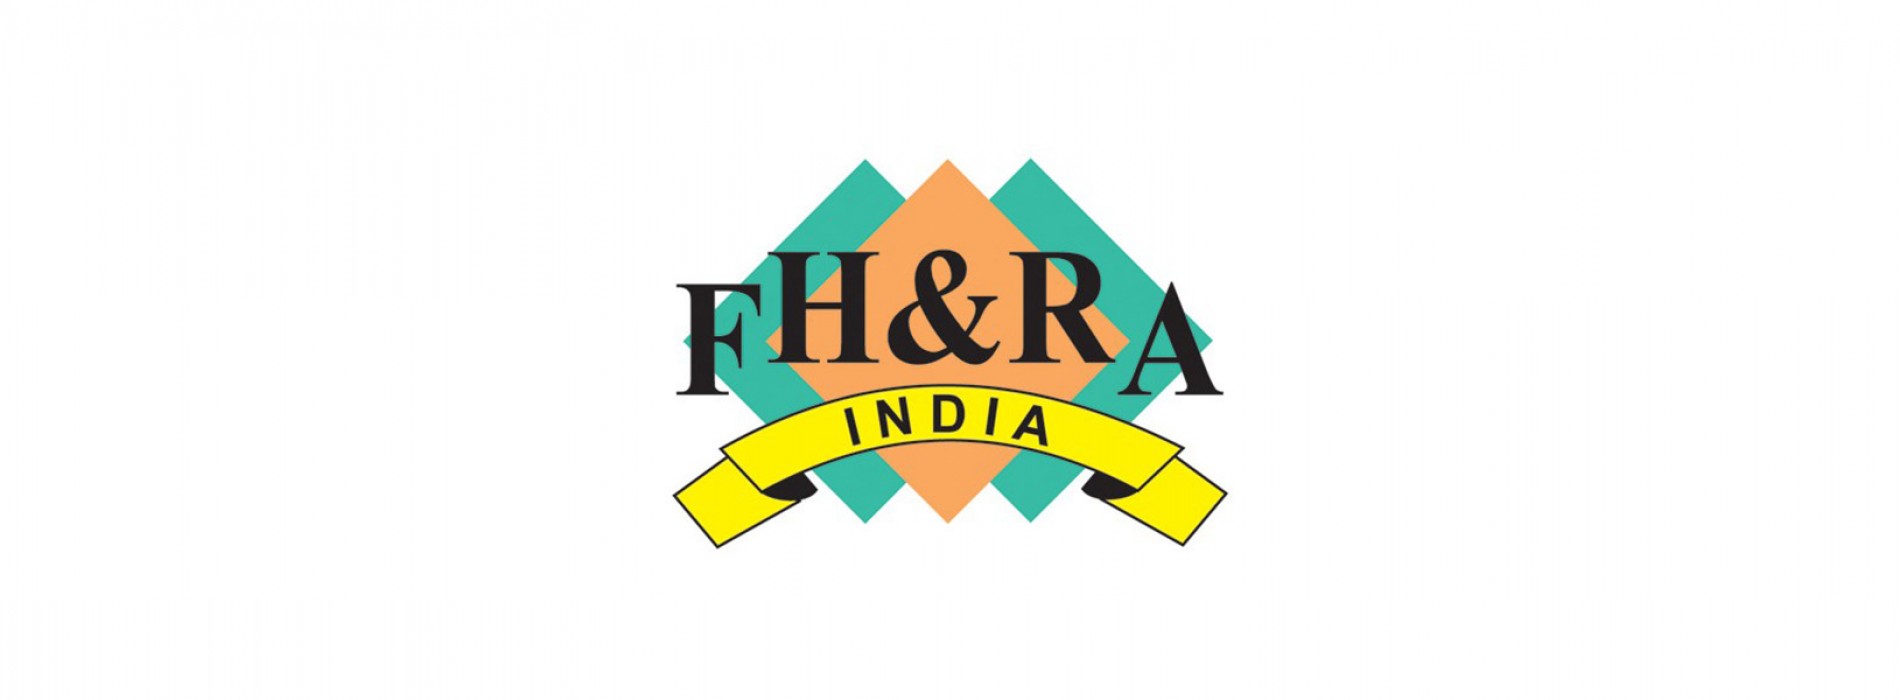 Ahead of the assembly elections, FHRAI submits representations to political parties chiefs requesting policy reforms for hospitality sector in Punjab